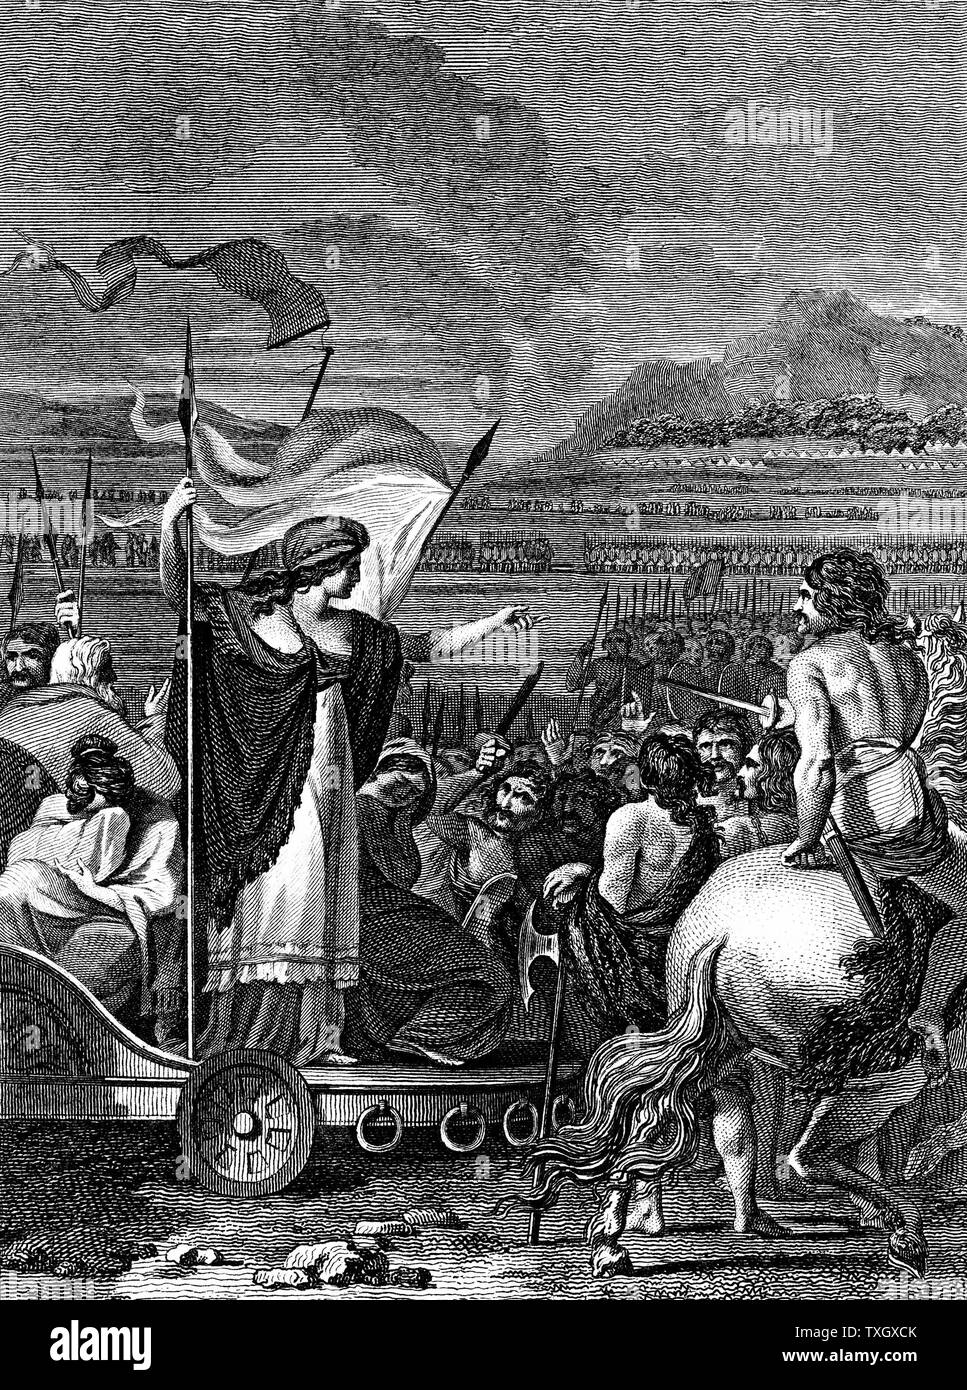 Boudicca (Boadicea) lst century British queen of Iceni, standing in her chariot with her weeping, dishonoured daughters, haranguing her troops. Finally overwhelmed by Romans, Boudicca is said to have taken poison 1824 Copperplate engraving Stock Photo